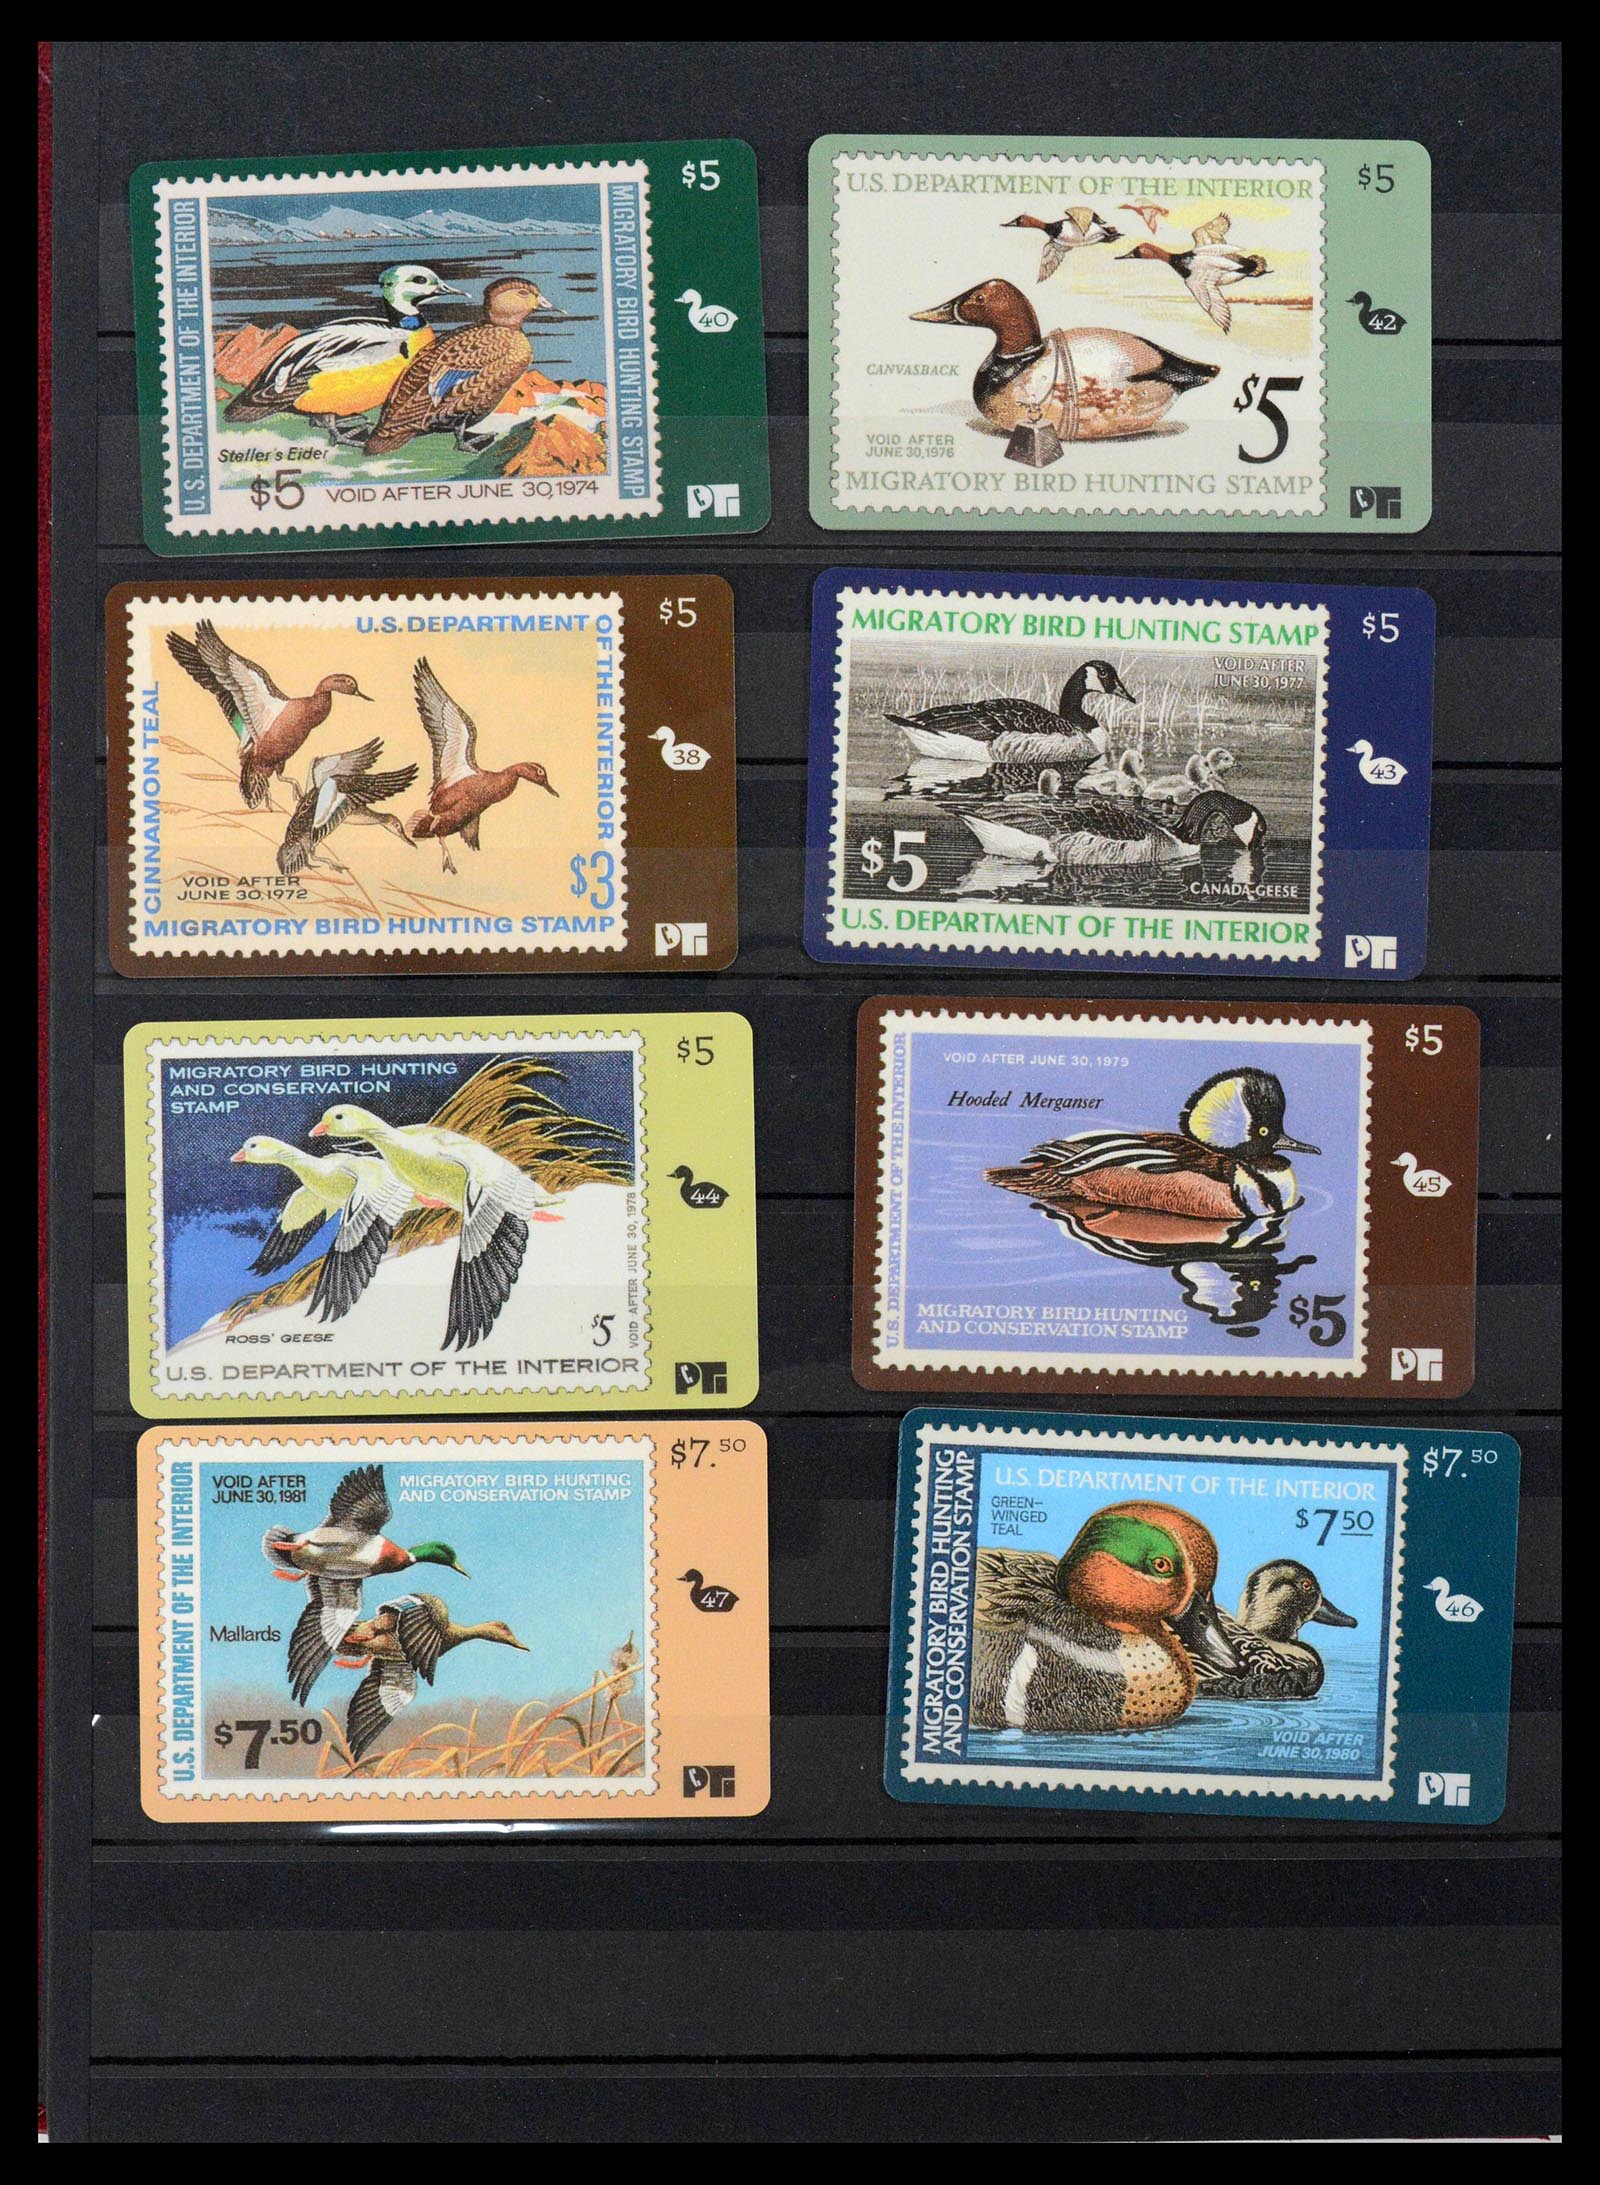 39426 0024 - Stamp collection 39426 USA duckstamps 1934-2007.